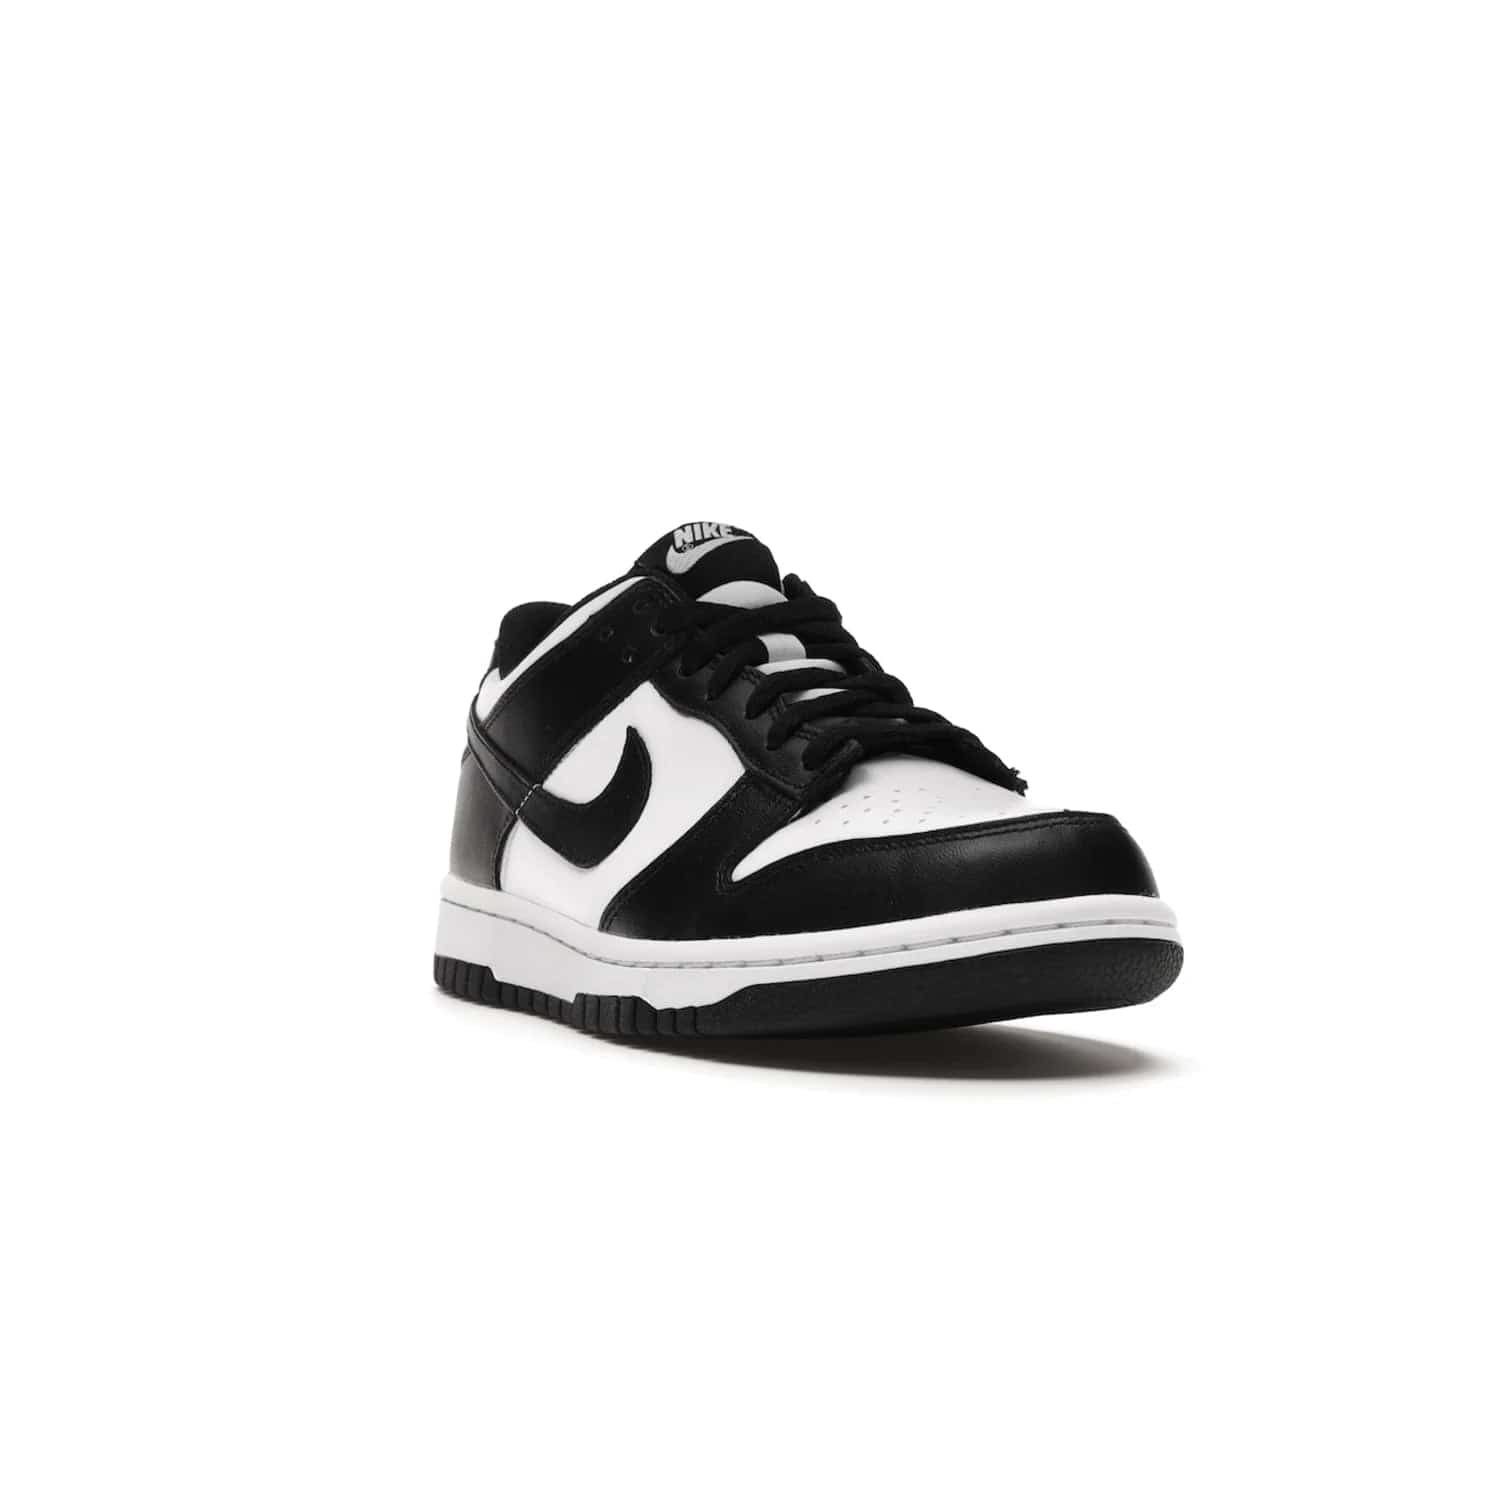 Nike Dunk Low Retro White Black Panda (2021) (GS) - Image 7 - Only at www.BallersClubKickz.com - Upgrade your style with the Nike Dunk Low Retro White Black (GS). Featuring premium leather, iconic Nike text, signature Swoosh logo and striking black/white colorway, this striking silhouette is the perfect mix of style and comfort. Colorway released in March 2021.